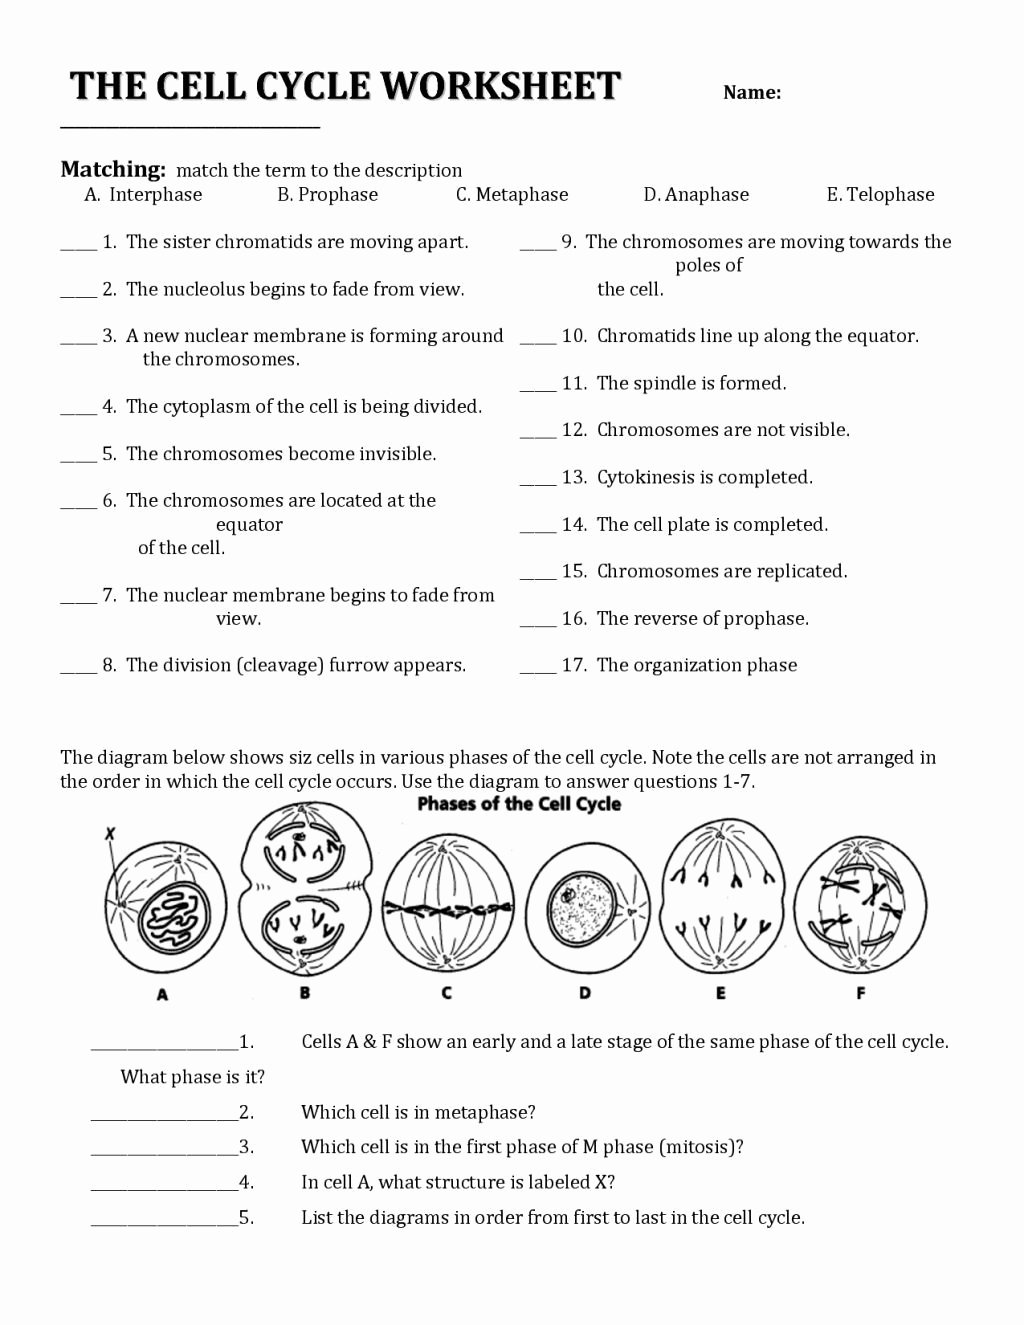 Cycles Worksheet Answer Key Elegant Image for the Cell Cycle Coloring Worksheet Key